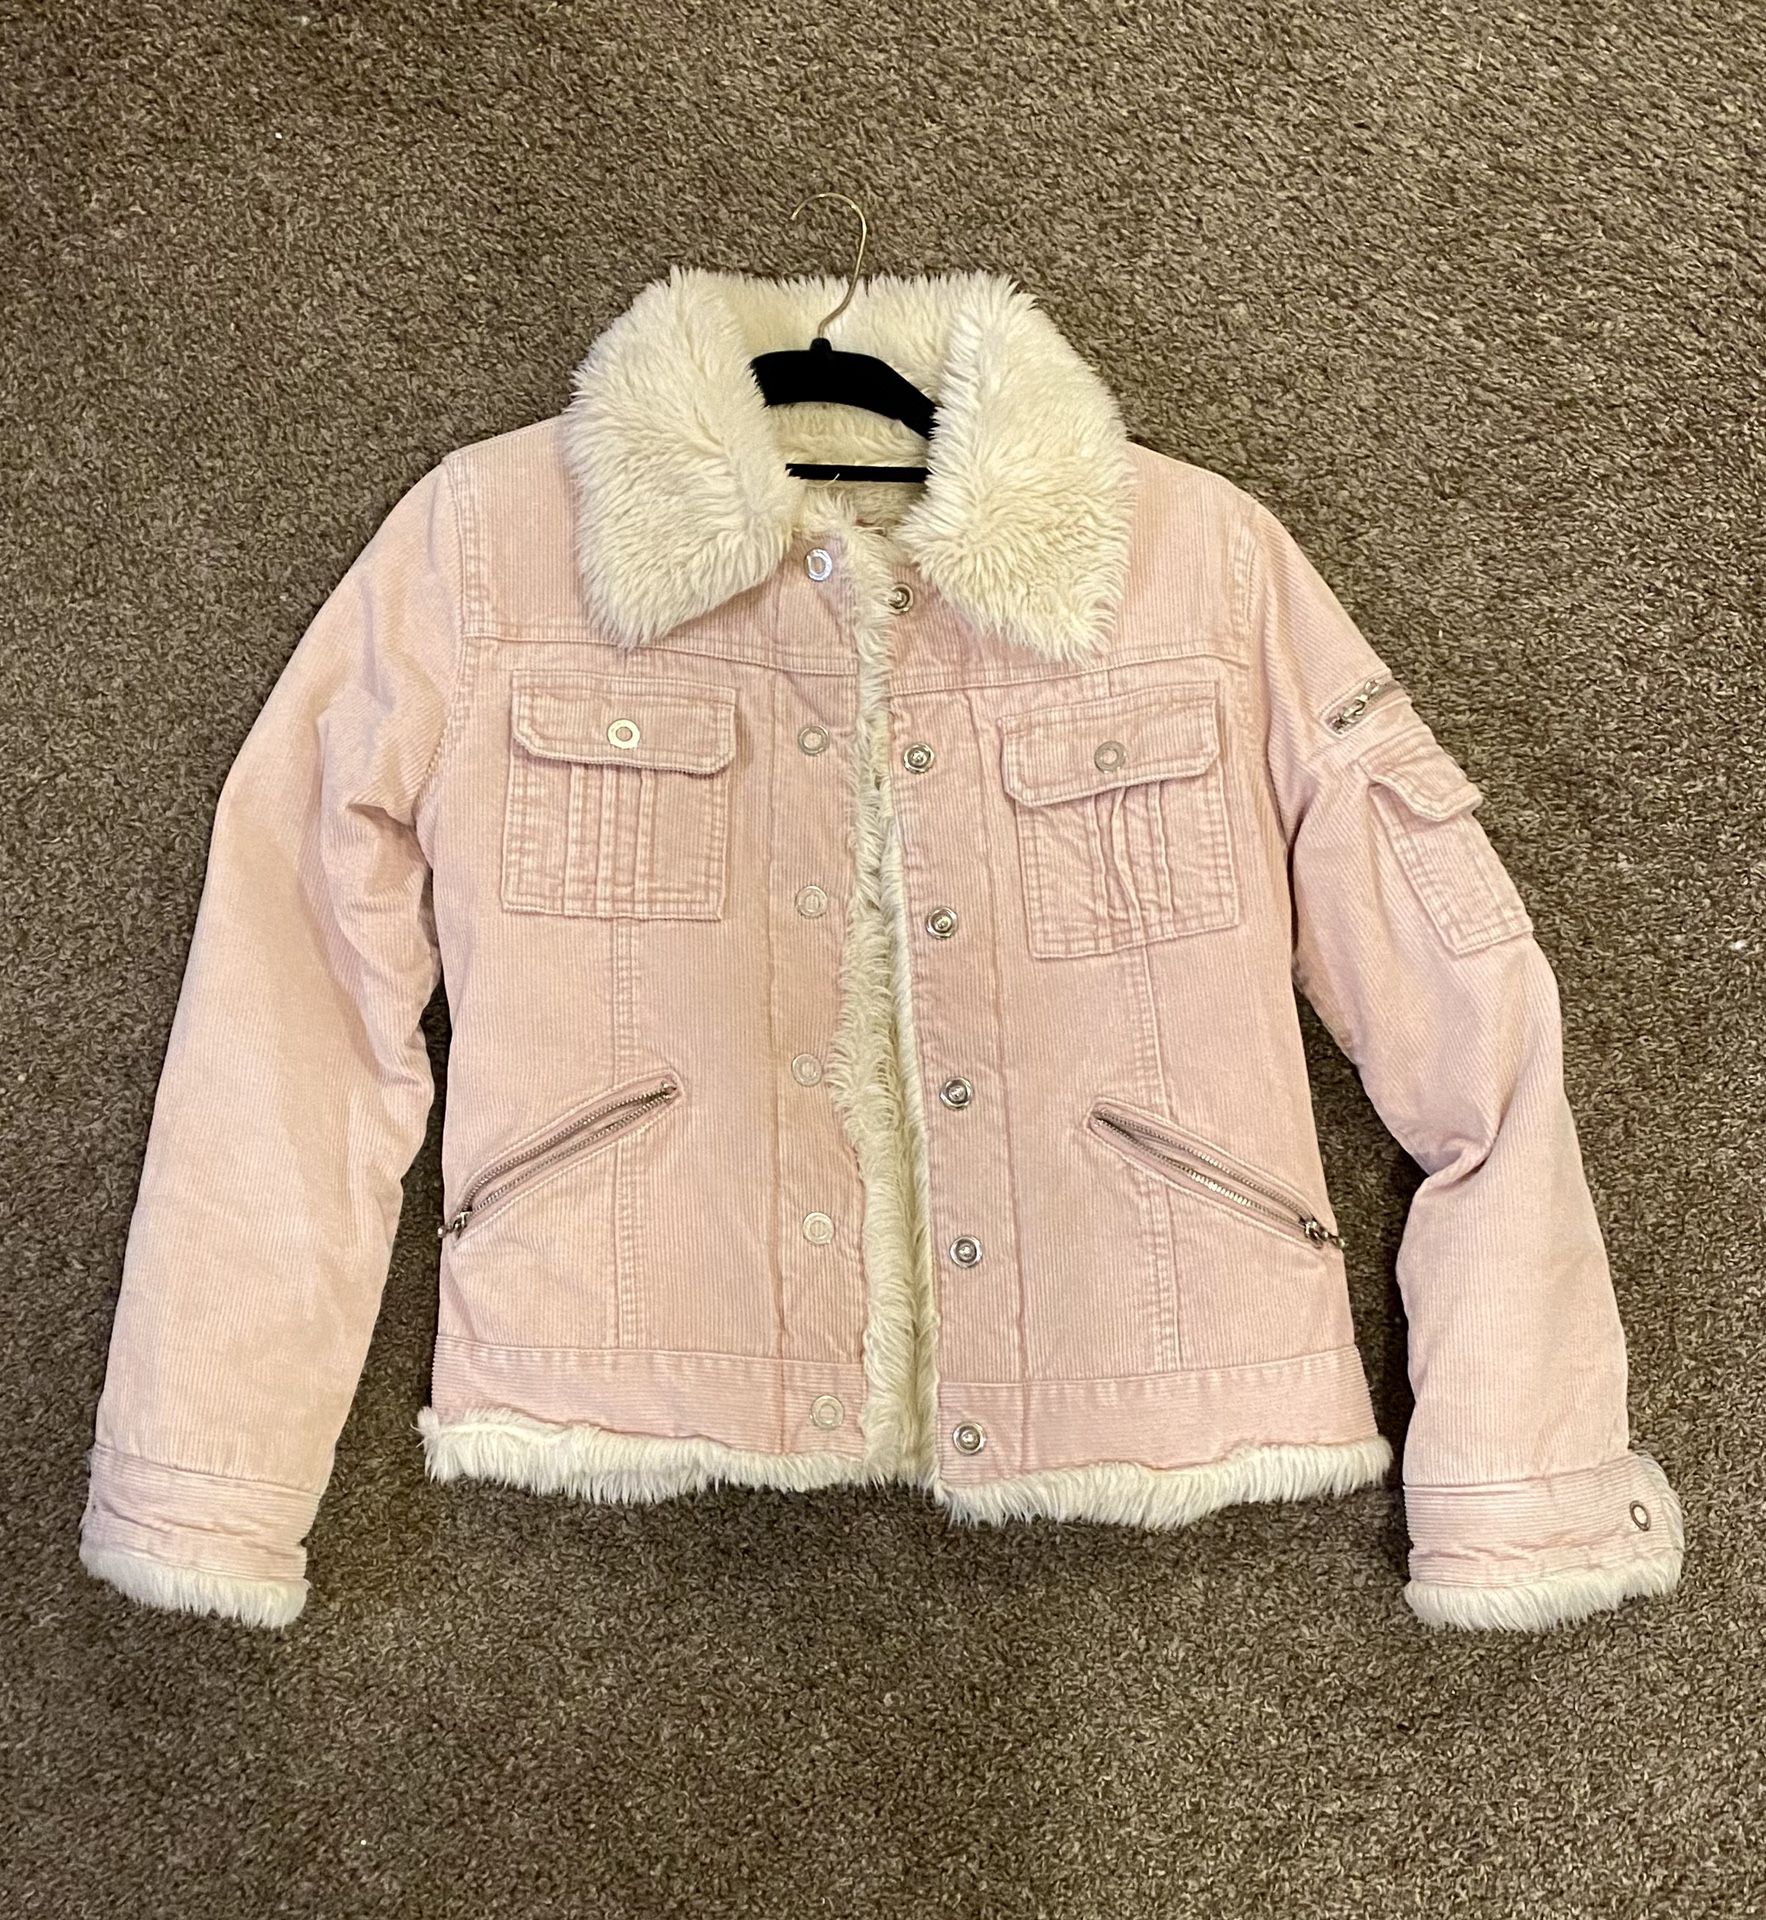 Sherpa Jacket Im Great Condition 